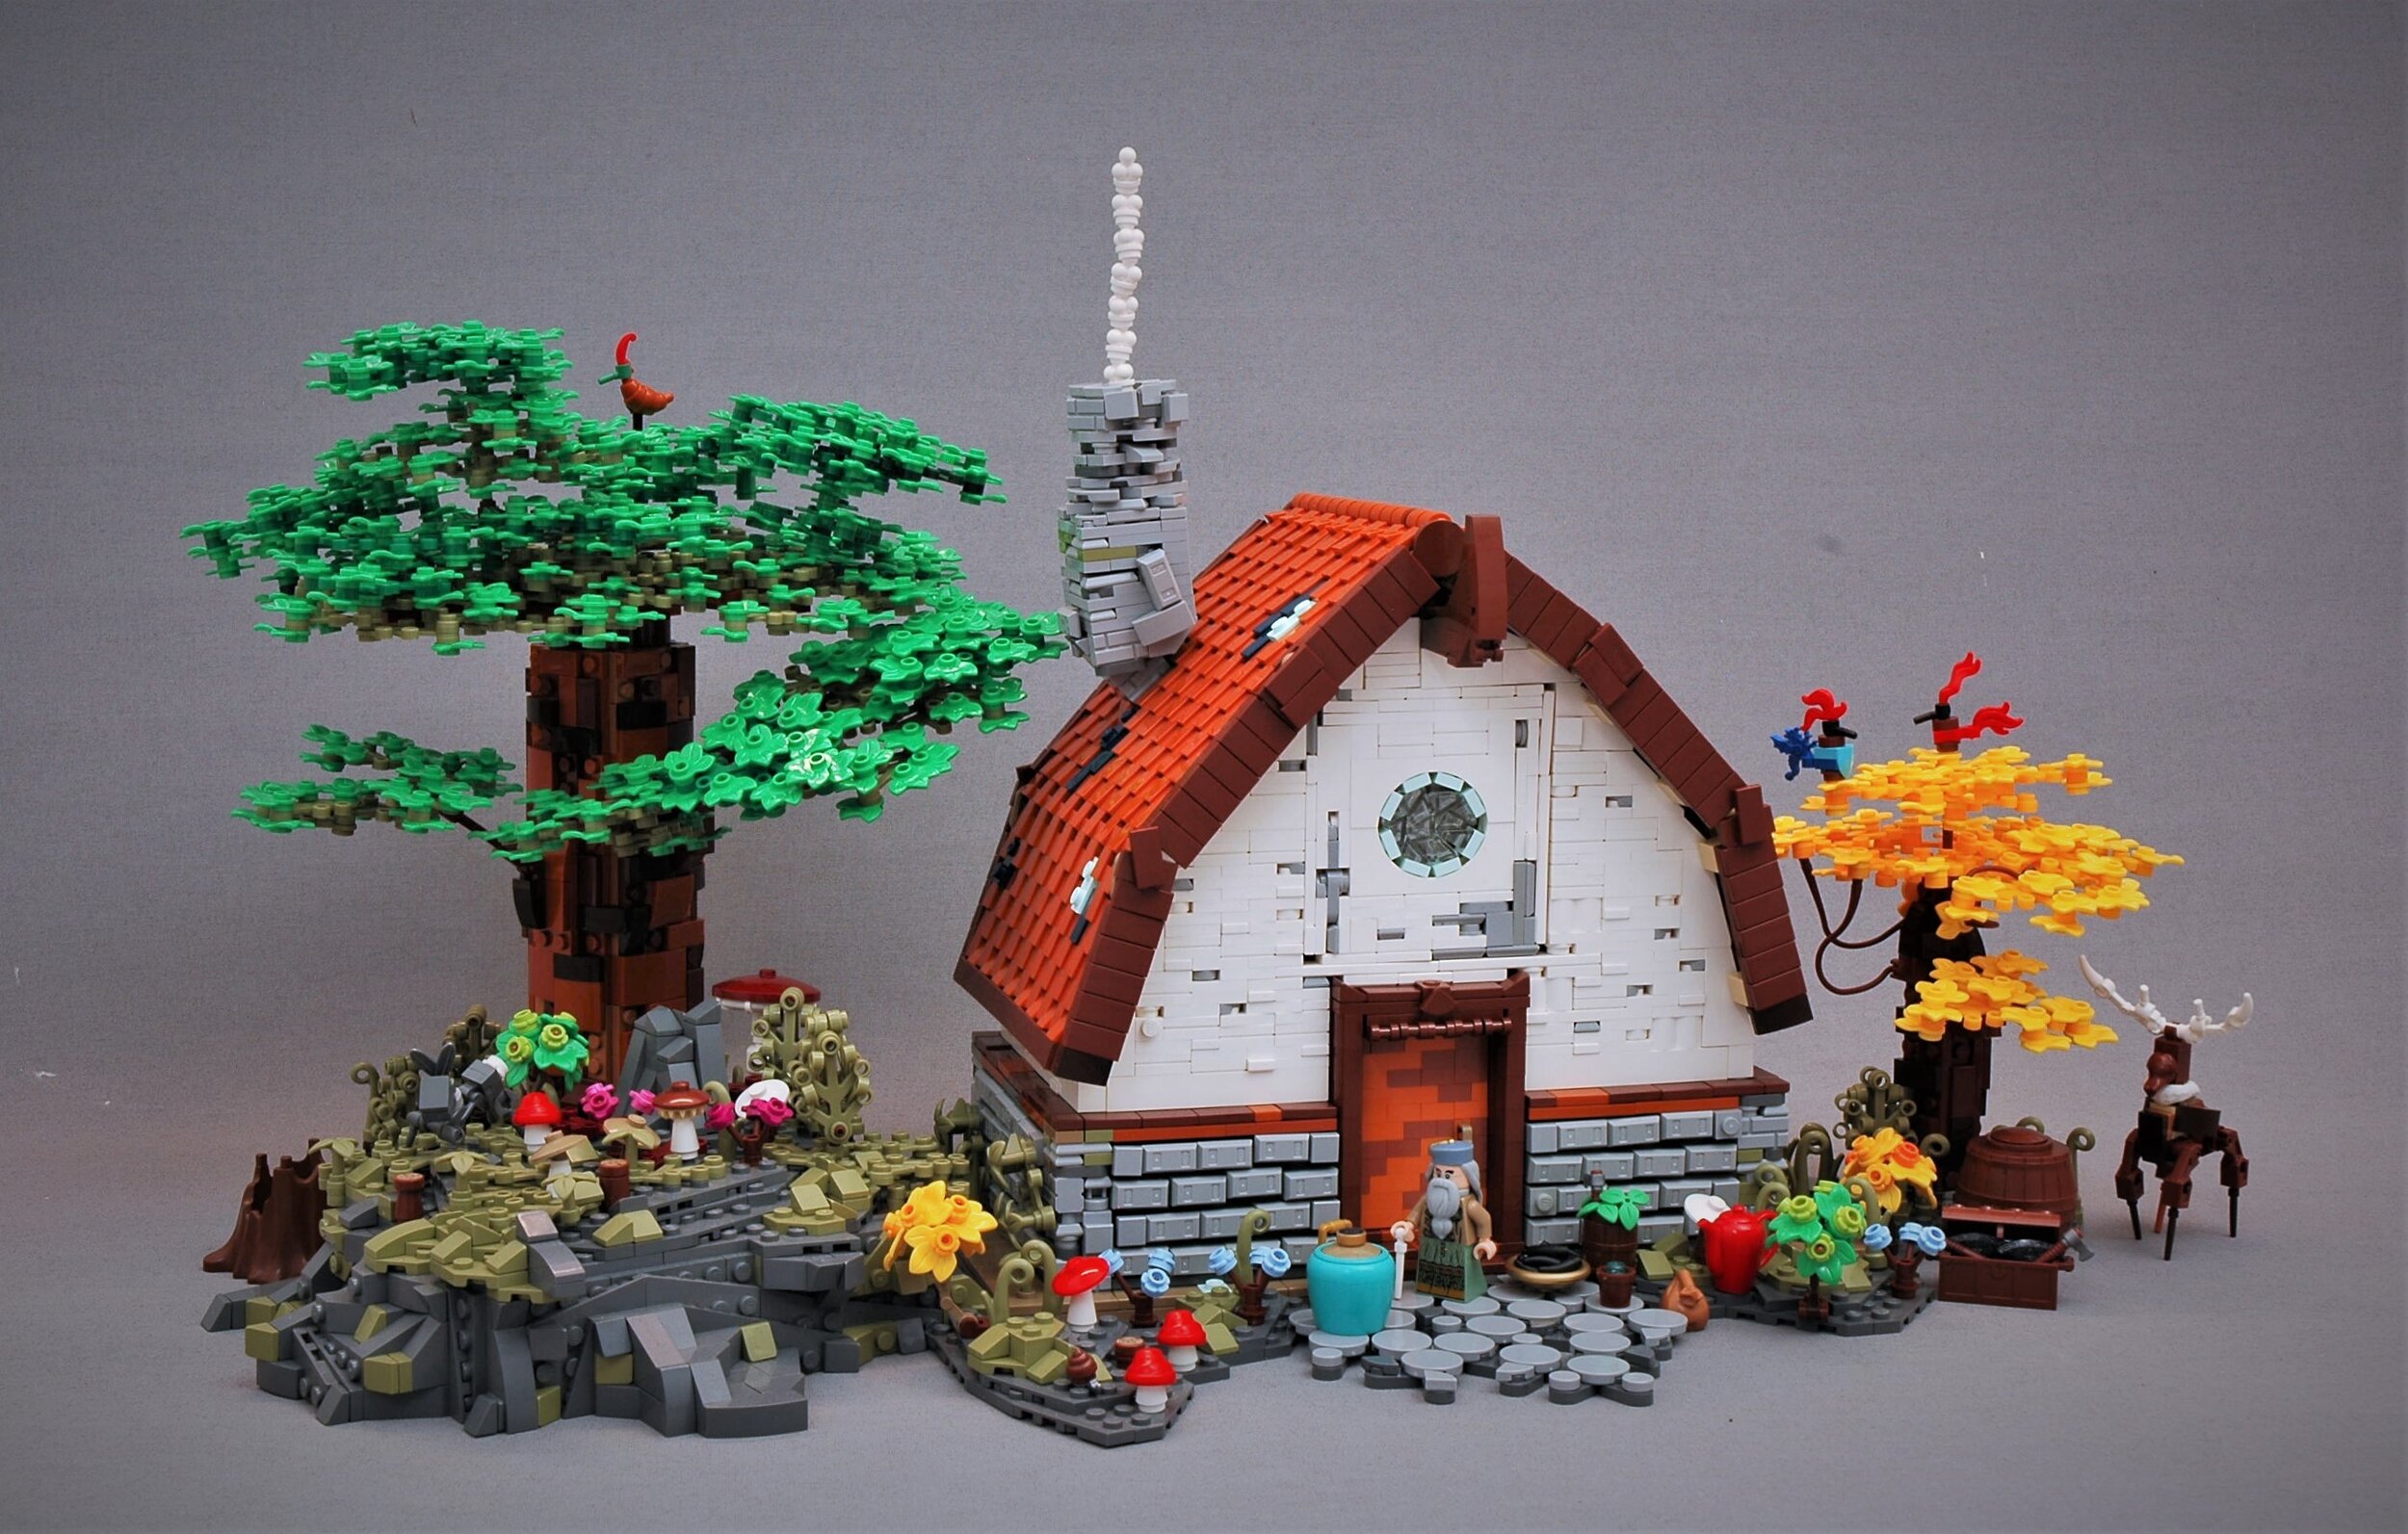 How to Build a LEGO Cottage in the Most Illegal Way Possible - BrickNerd All things LEGO and the LEGO fan community